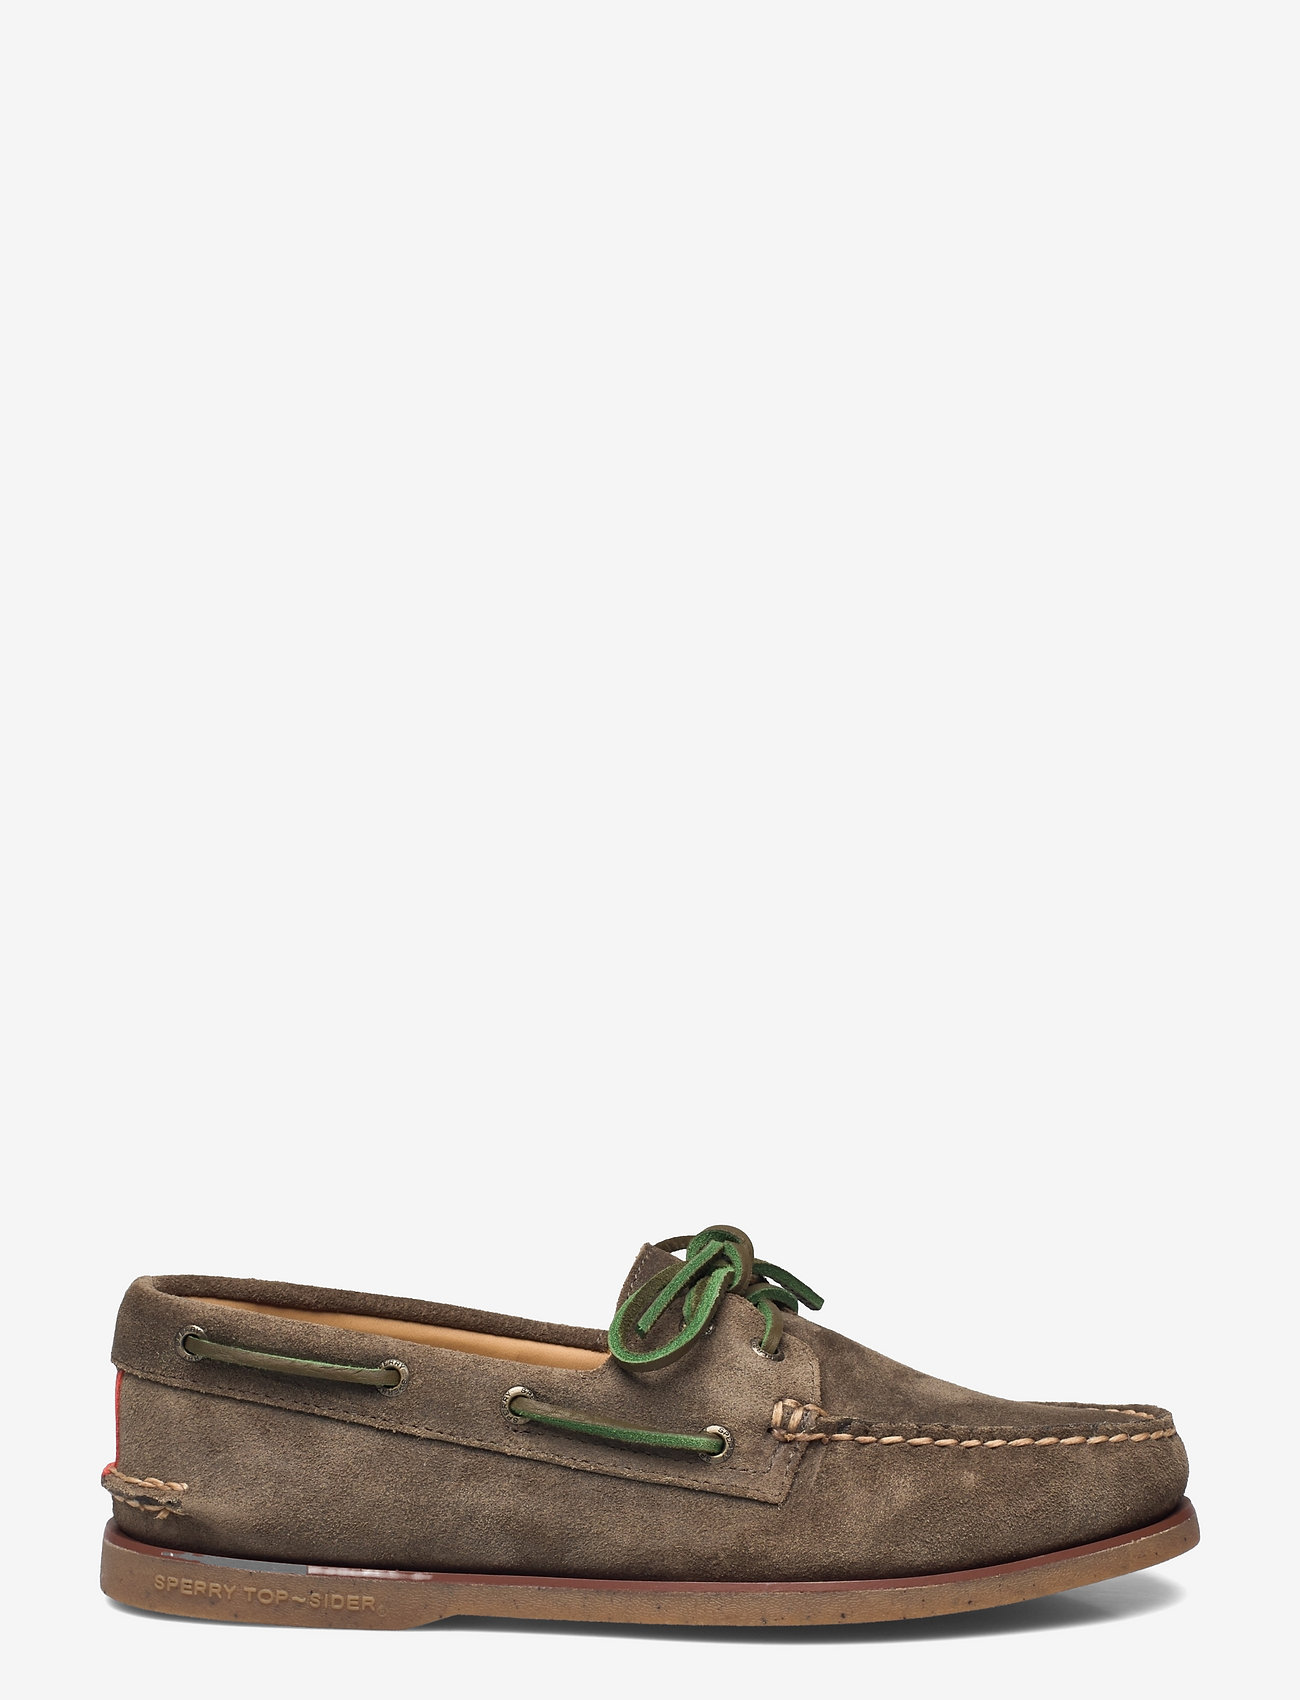 Sperry Top-Sider Mens Gold A/O 2-Eye Boat Shoe